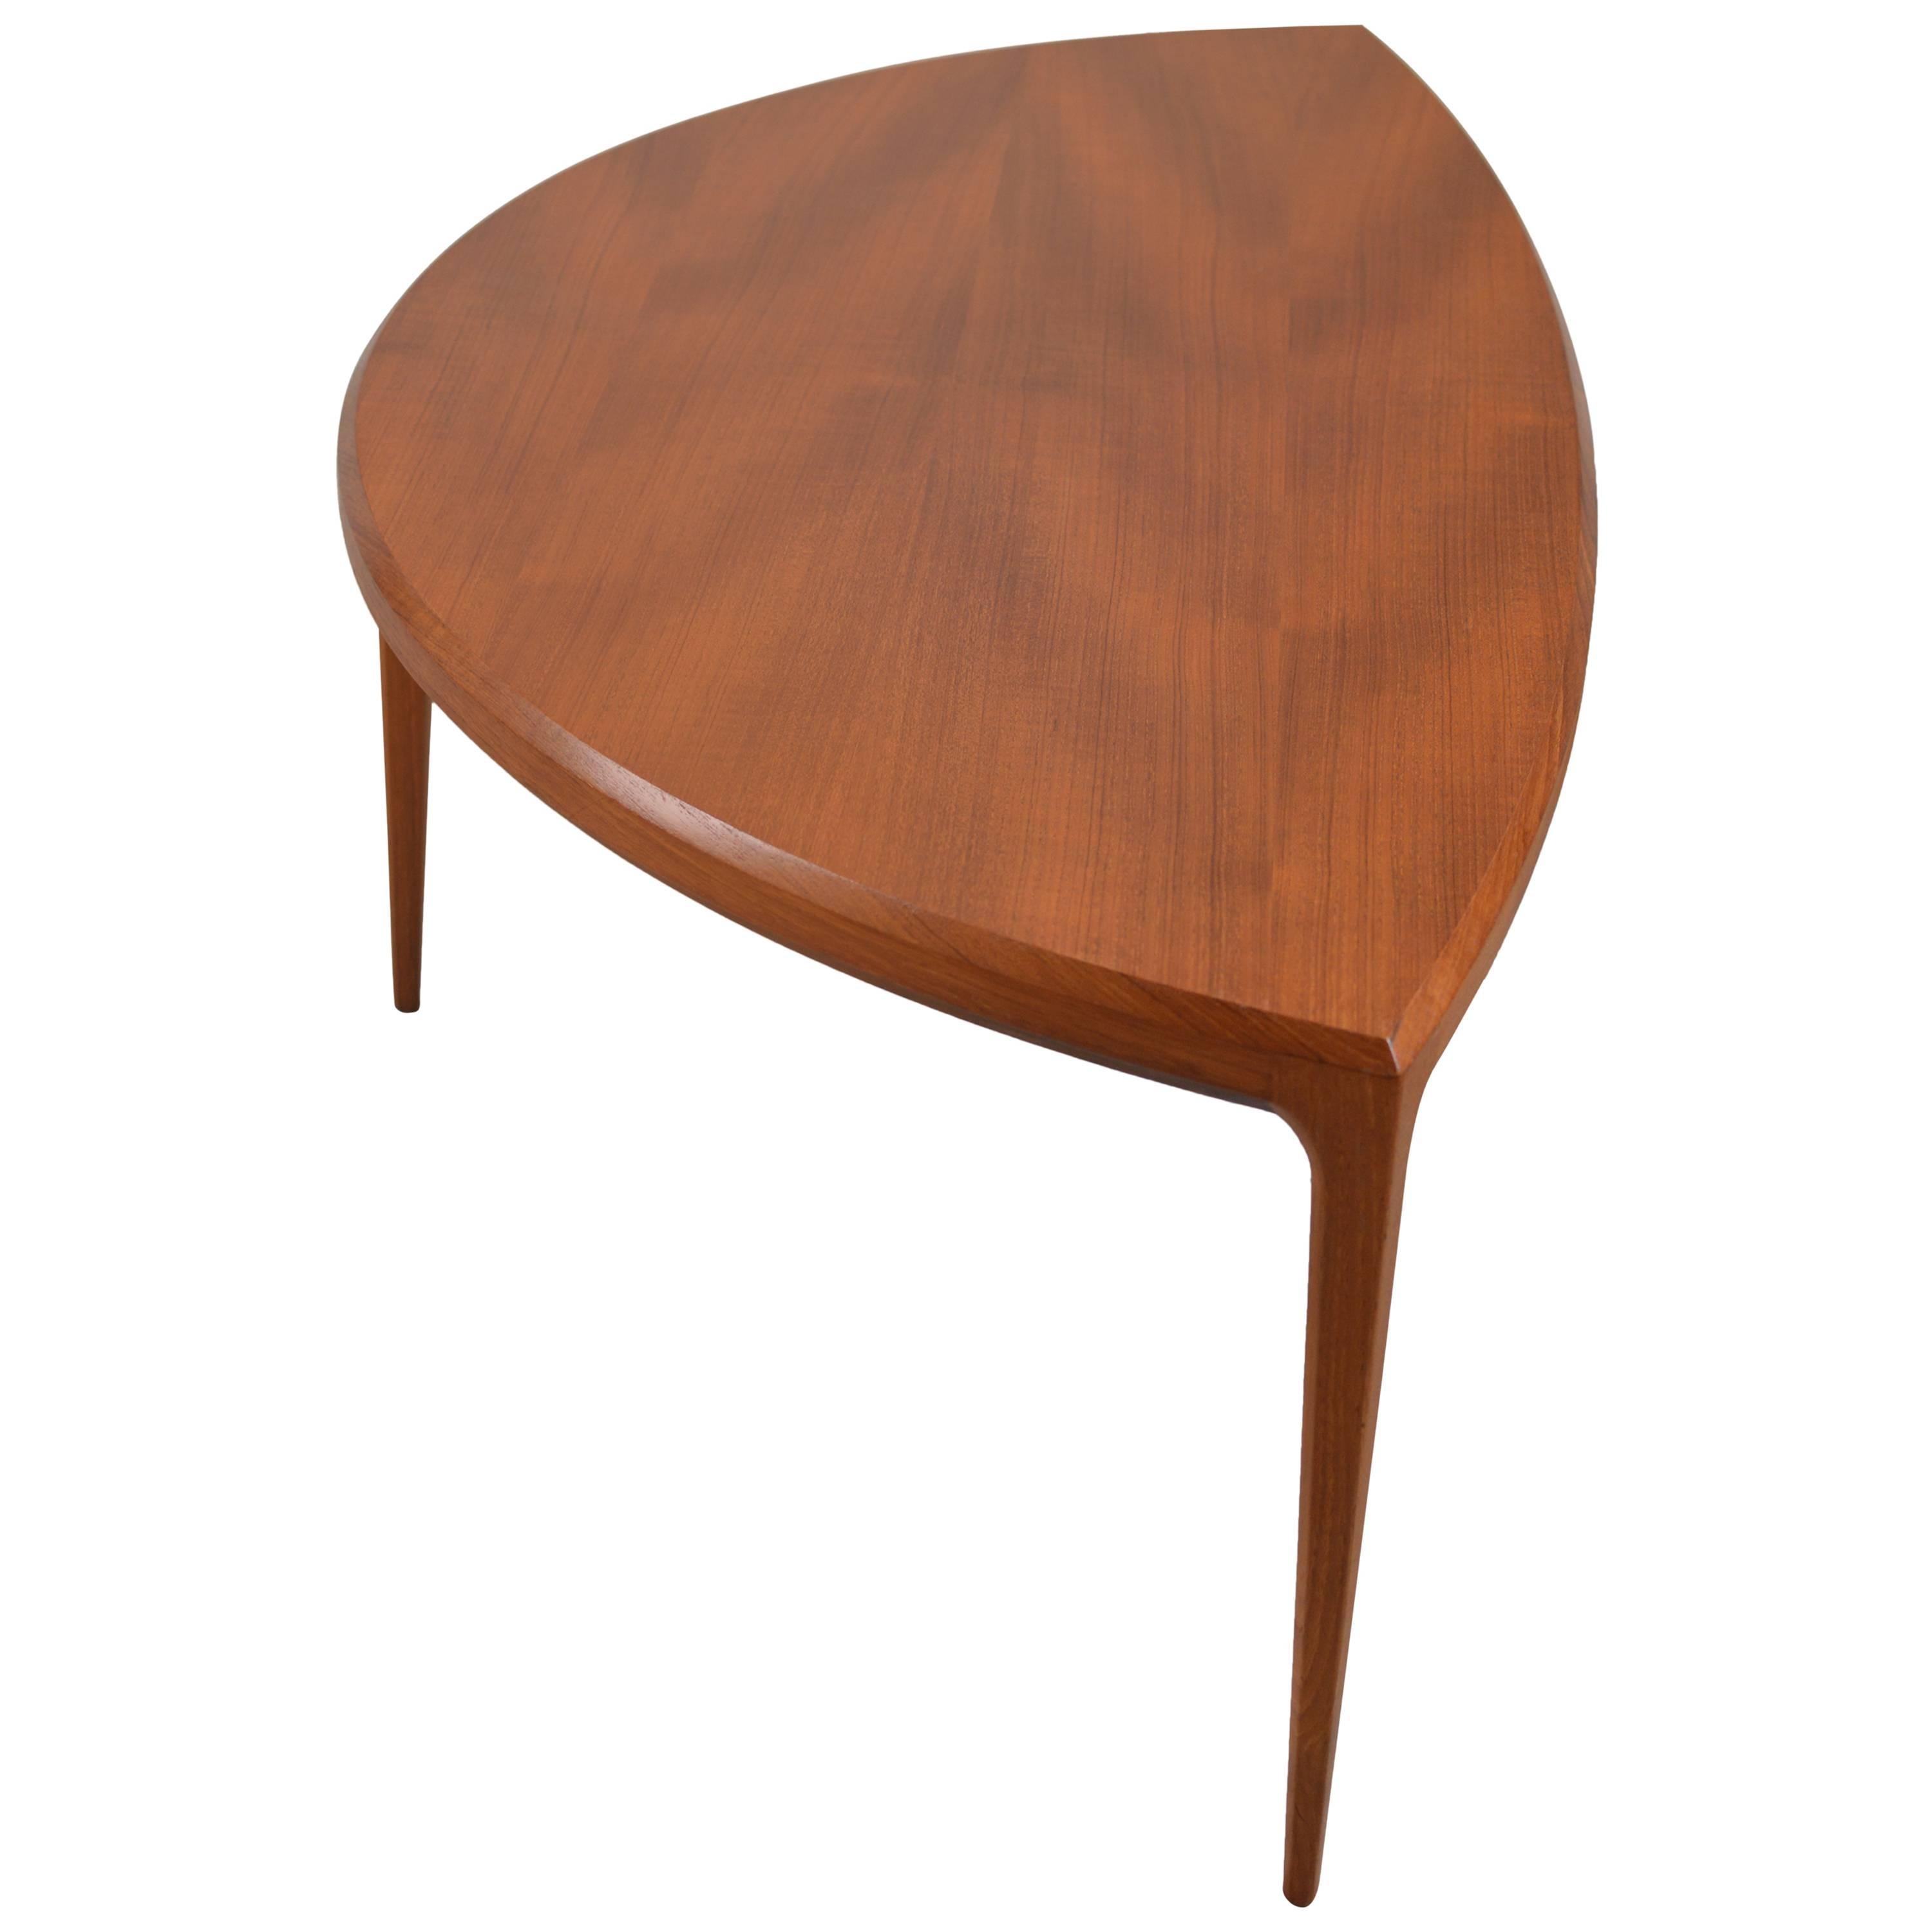 Exceptional elegant free form three-legged coffee table executed in teak by Johannes Andersen for Silkeborg with beautiful proportions. Designed in 1958.
Tables comes in wonderful refinished condition without repairs.

International shipping quotes